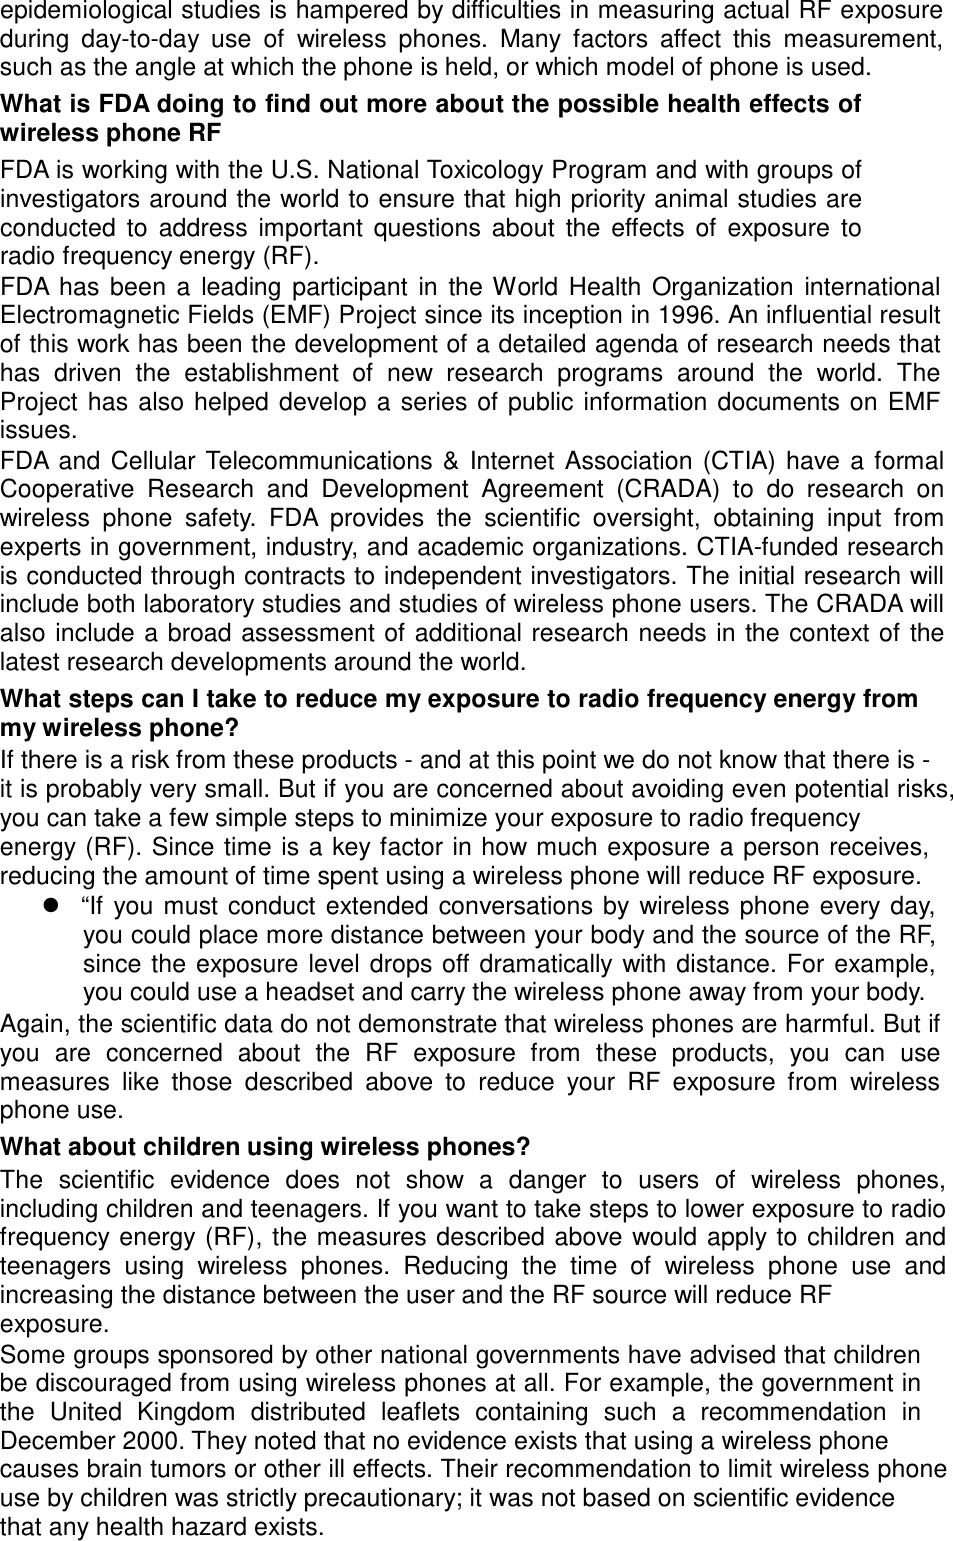 epidemiological studies is hampered by difficulties in measuring actual RF exposure during  day-to-day  use  of  wireless  phones.  Many  factors  affect  this  measurement, such as the angle at which the phone is held, or which model of phone is used. What is FDA doing to find out more about the possible health effects of wireless phone RF FDA is working with the U.S. National Toxicology Program and with groups of investigators around the world to ensure that high priority animal studies are conducted  to  address  important  questions  about  the  effects  of  exposure  to radio frequency energy (RF). FDA has  been  a  leading  participant  in  the World  Health  Organization  international Electromagnetic Fields (EMF) Project since its inception in 1996. An influential result of this work has been the development of a detailed agenda of research needs that has  driven  the  establishment  of  new  research  programs  around  the  world.  The Project has  also helped  develop  a  series  of public information  documents on  EMF issues. FDA and  Cellular  Telecommunications  &amp;  Internet  Association  (CTIA)  have  a  formal Cooperative  Research  and  Development  Agreement  (CRADA) to  do  research  on wireless  phone  safety.  FDA  provides the  scientific  oversight, obtaining  input  from experts in government, industry, and academic organizations. CTIA-funded research is conducted through contracts to independent investigators. The initial research will include both laboratory studies and studies of wireless phone users. The CRADA will also include a broad assessment of additional research needs in the context of  the latest research developments around the world. What steps can I take to reduce my exposure to radio frequency energy from my wireless phone? If there is a risk from these products - and at this point we do not know that there is - it is probably very small. But if you are concerned about avoiding even potential risks, you can take a few simple steps to minimize your exposure to radio frequency energy (RF). Since time is a  key factor in how much exposure a person receives, reducing the amount of time spent using a wireless phone will reduce RF exposure.  “If  you  must  conduct  extended conversations by  wireless phone  every day, you could place more distance between your body and the source of the R F, since the exposure  level drops off dramatically  with distance. For  example, you could use a headset and carry the wireless phone away from your body. Again, the scientific data do not demonstrate that wireless phones are harmful. But if you  are  concerned  about  the  RF  exposure  from  these  products,  you  can  use measures like  those  described  above  to  reduce  your RF exposure  from  wireless phone use. What about children using wireless phones? The  scientific  evidence  does  not  show  a  danger to  users  of  wireless  phones, including children and teenagers. If you want to take steps to lower exposure to radio frequency energy (RF),  the measures  described above would apply to children and teenagers  using  wireless  phones.  Reducing  the  time  of  wireless  phone  use  and increasing the distance between the user and the RF source will reduce RF exposure. Some groups sponsored by other national governments have advised that children be discouraged from using wireless phones at all. For example, the government in the  United  Kingdom  distributed  leaflets  containing  such a  recommendation  in December 2000. They noted that no evidence exists that using a wireless phone causes brain tumors or other ill effects. Their recommendation to limit wireless phone use by children was strictly precautionary; it was not based on scientific evidence that any health hazard exists. 